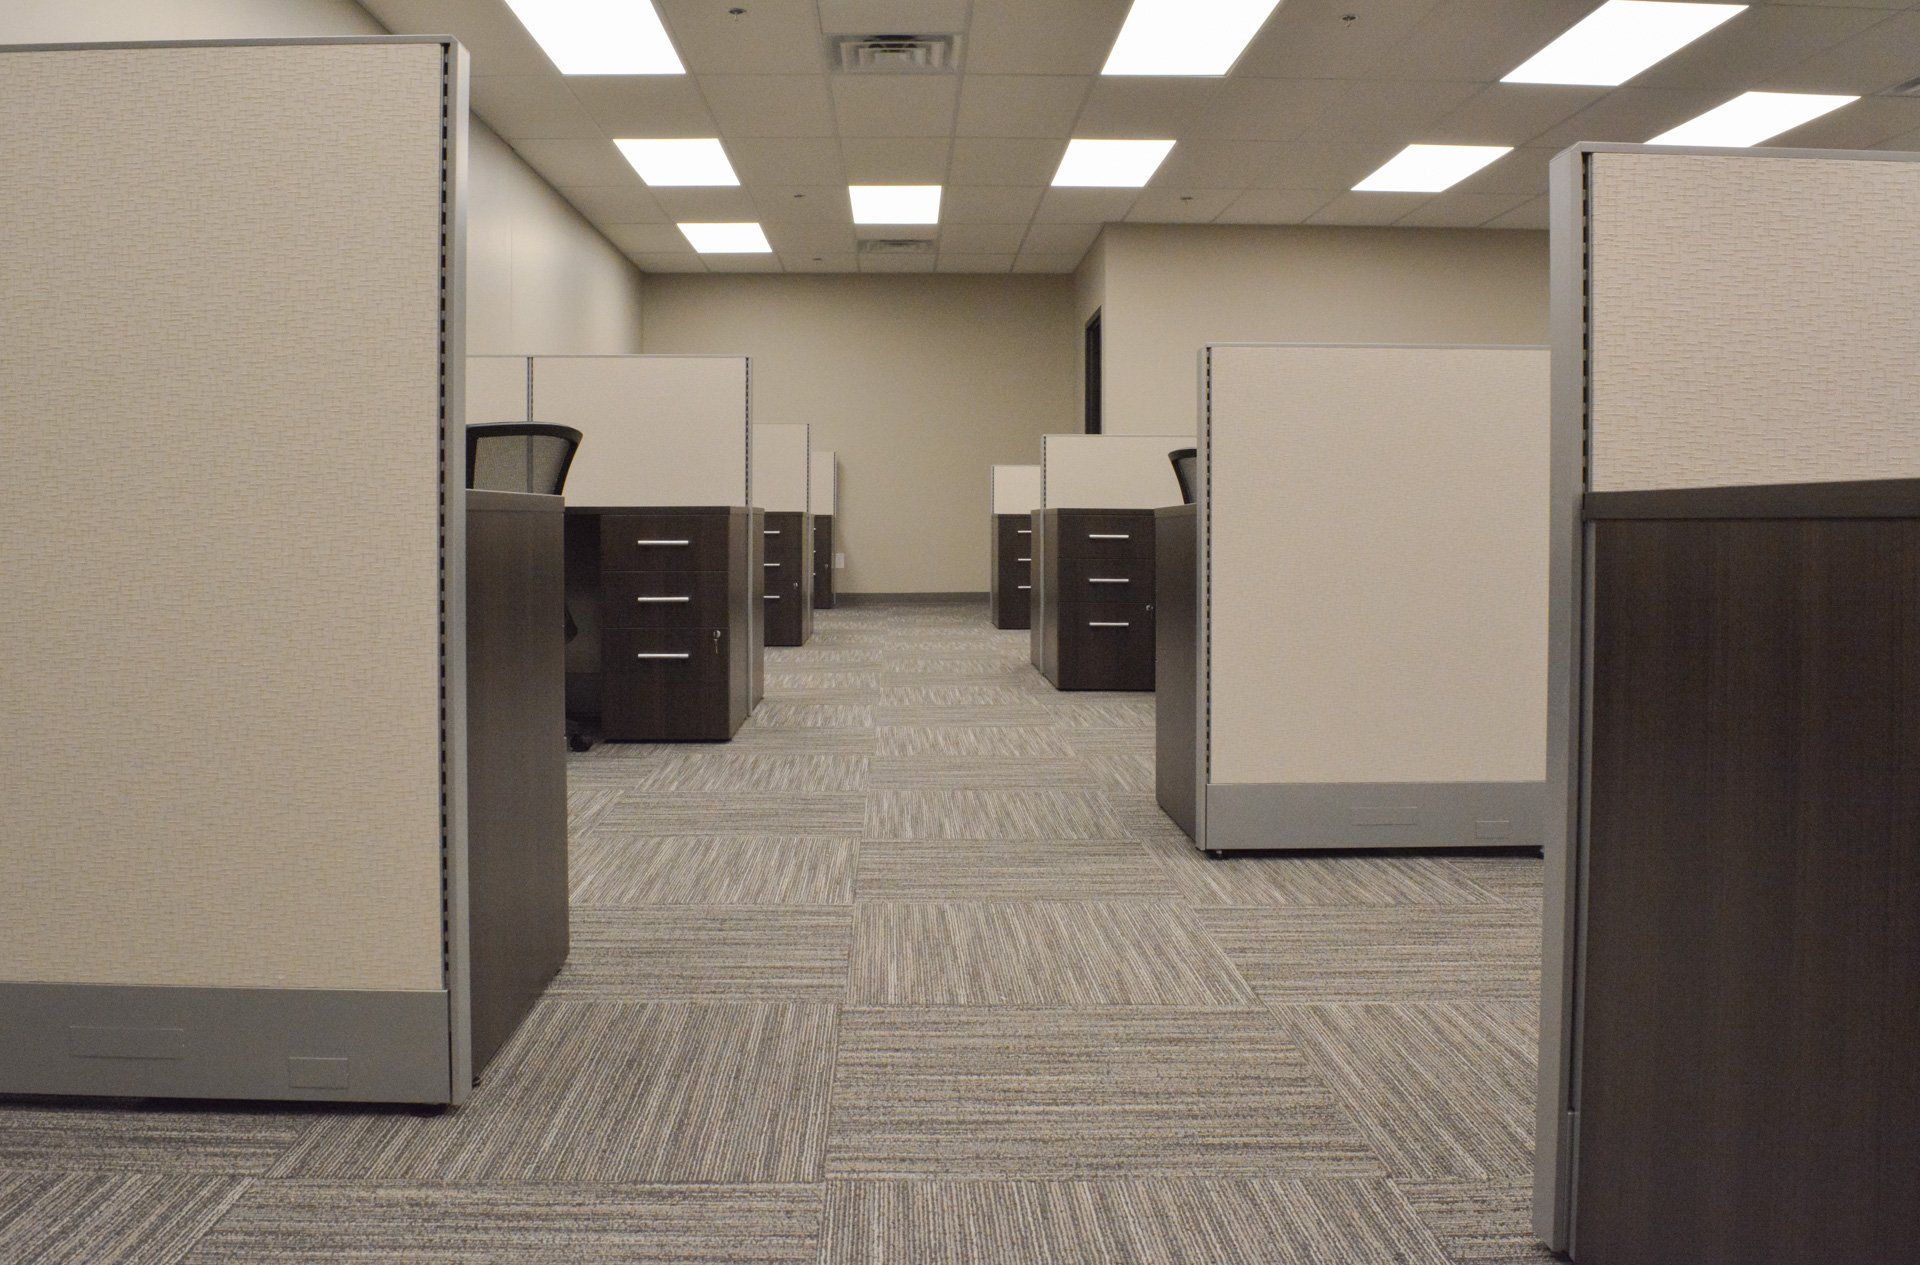 a row of cubicles in an office with a carpeted floor